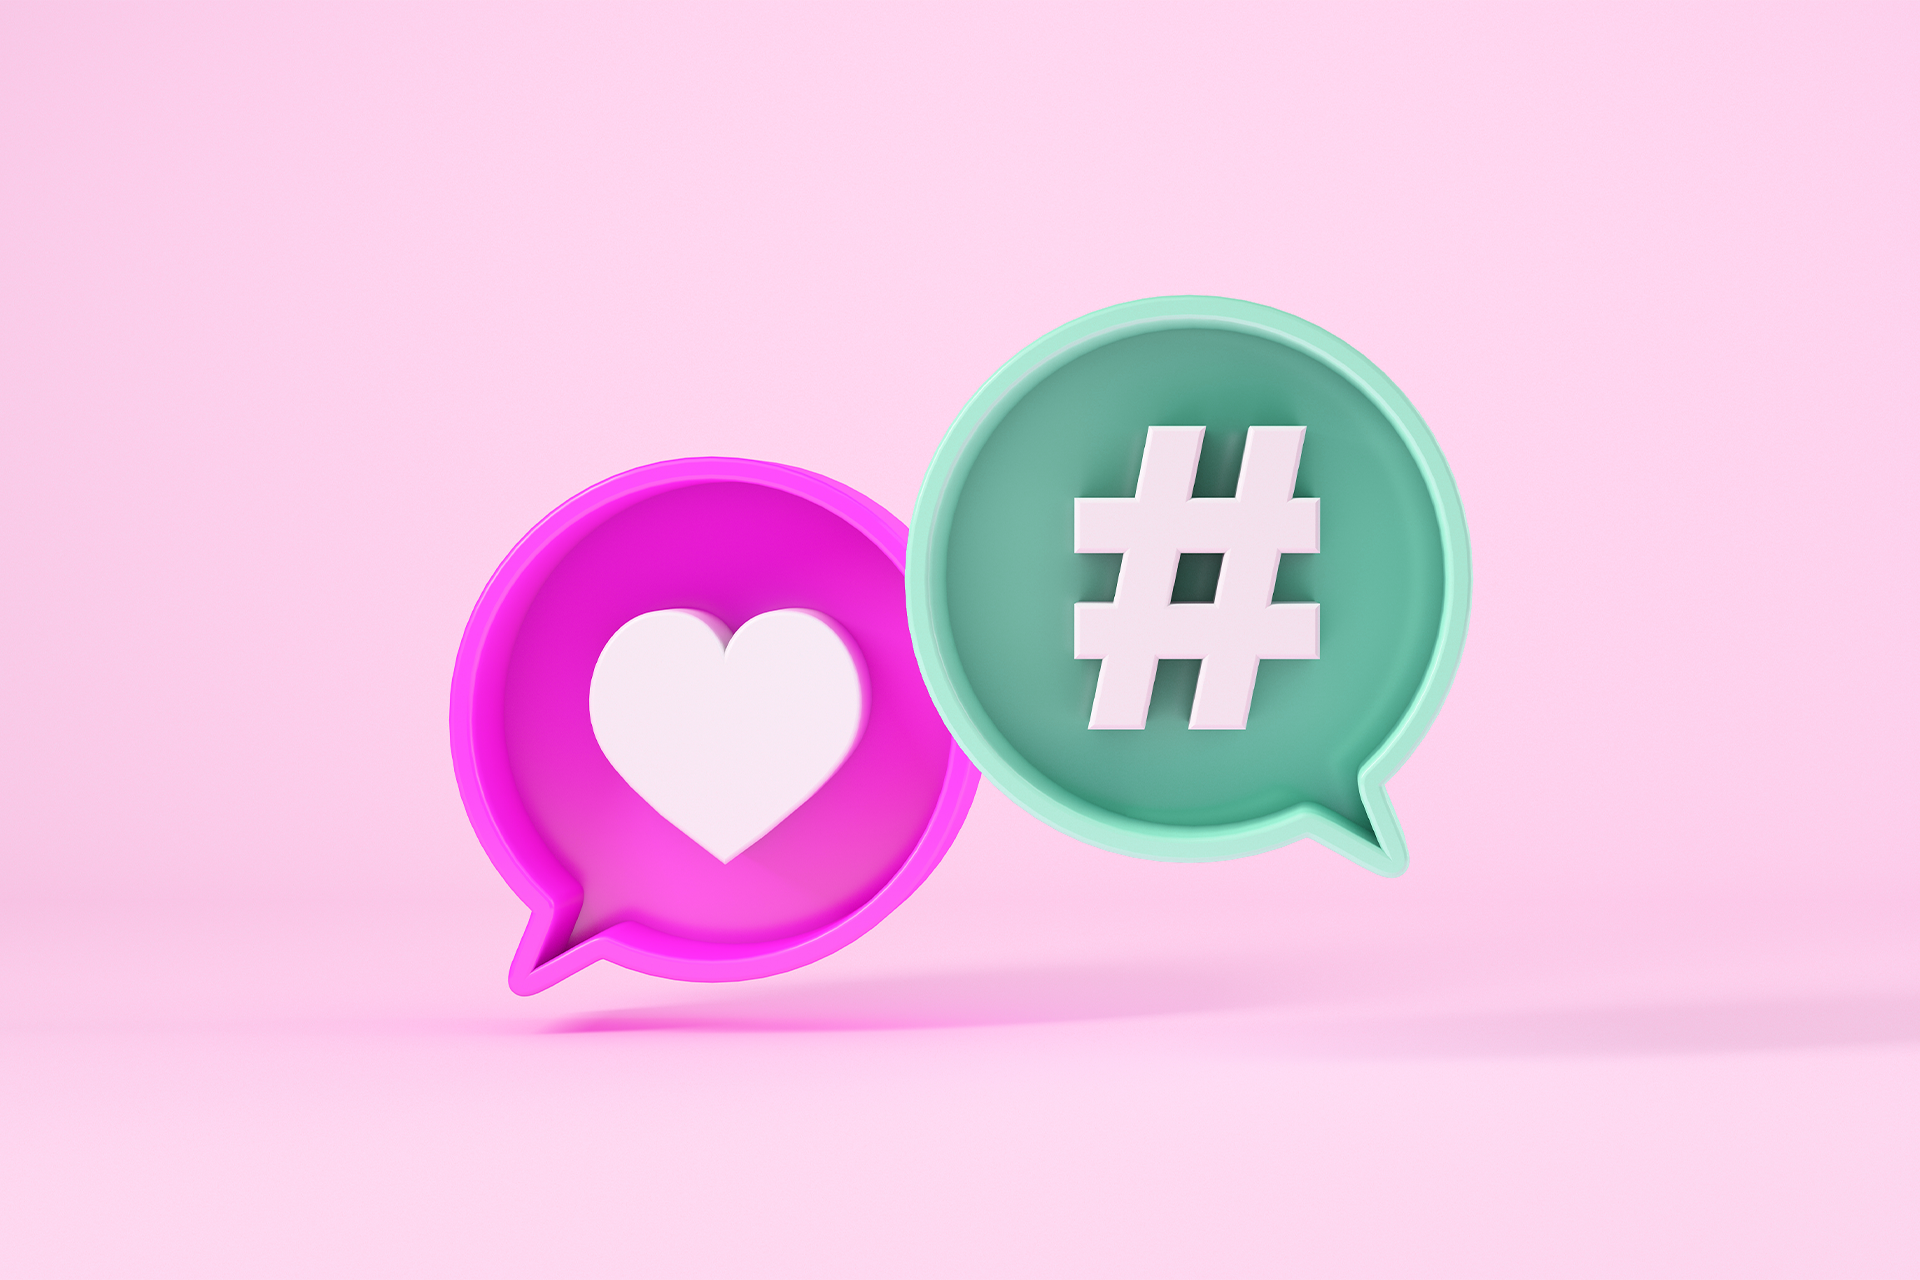 The most trending hashtags in South Africa